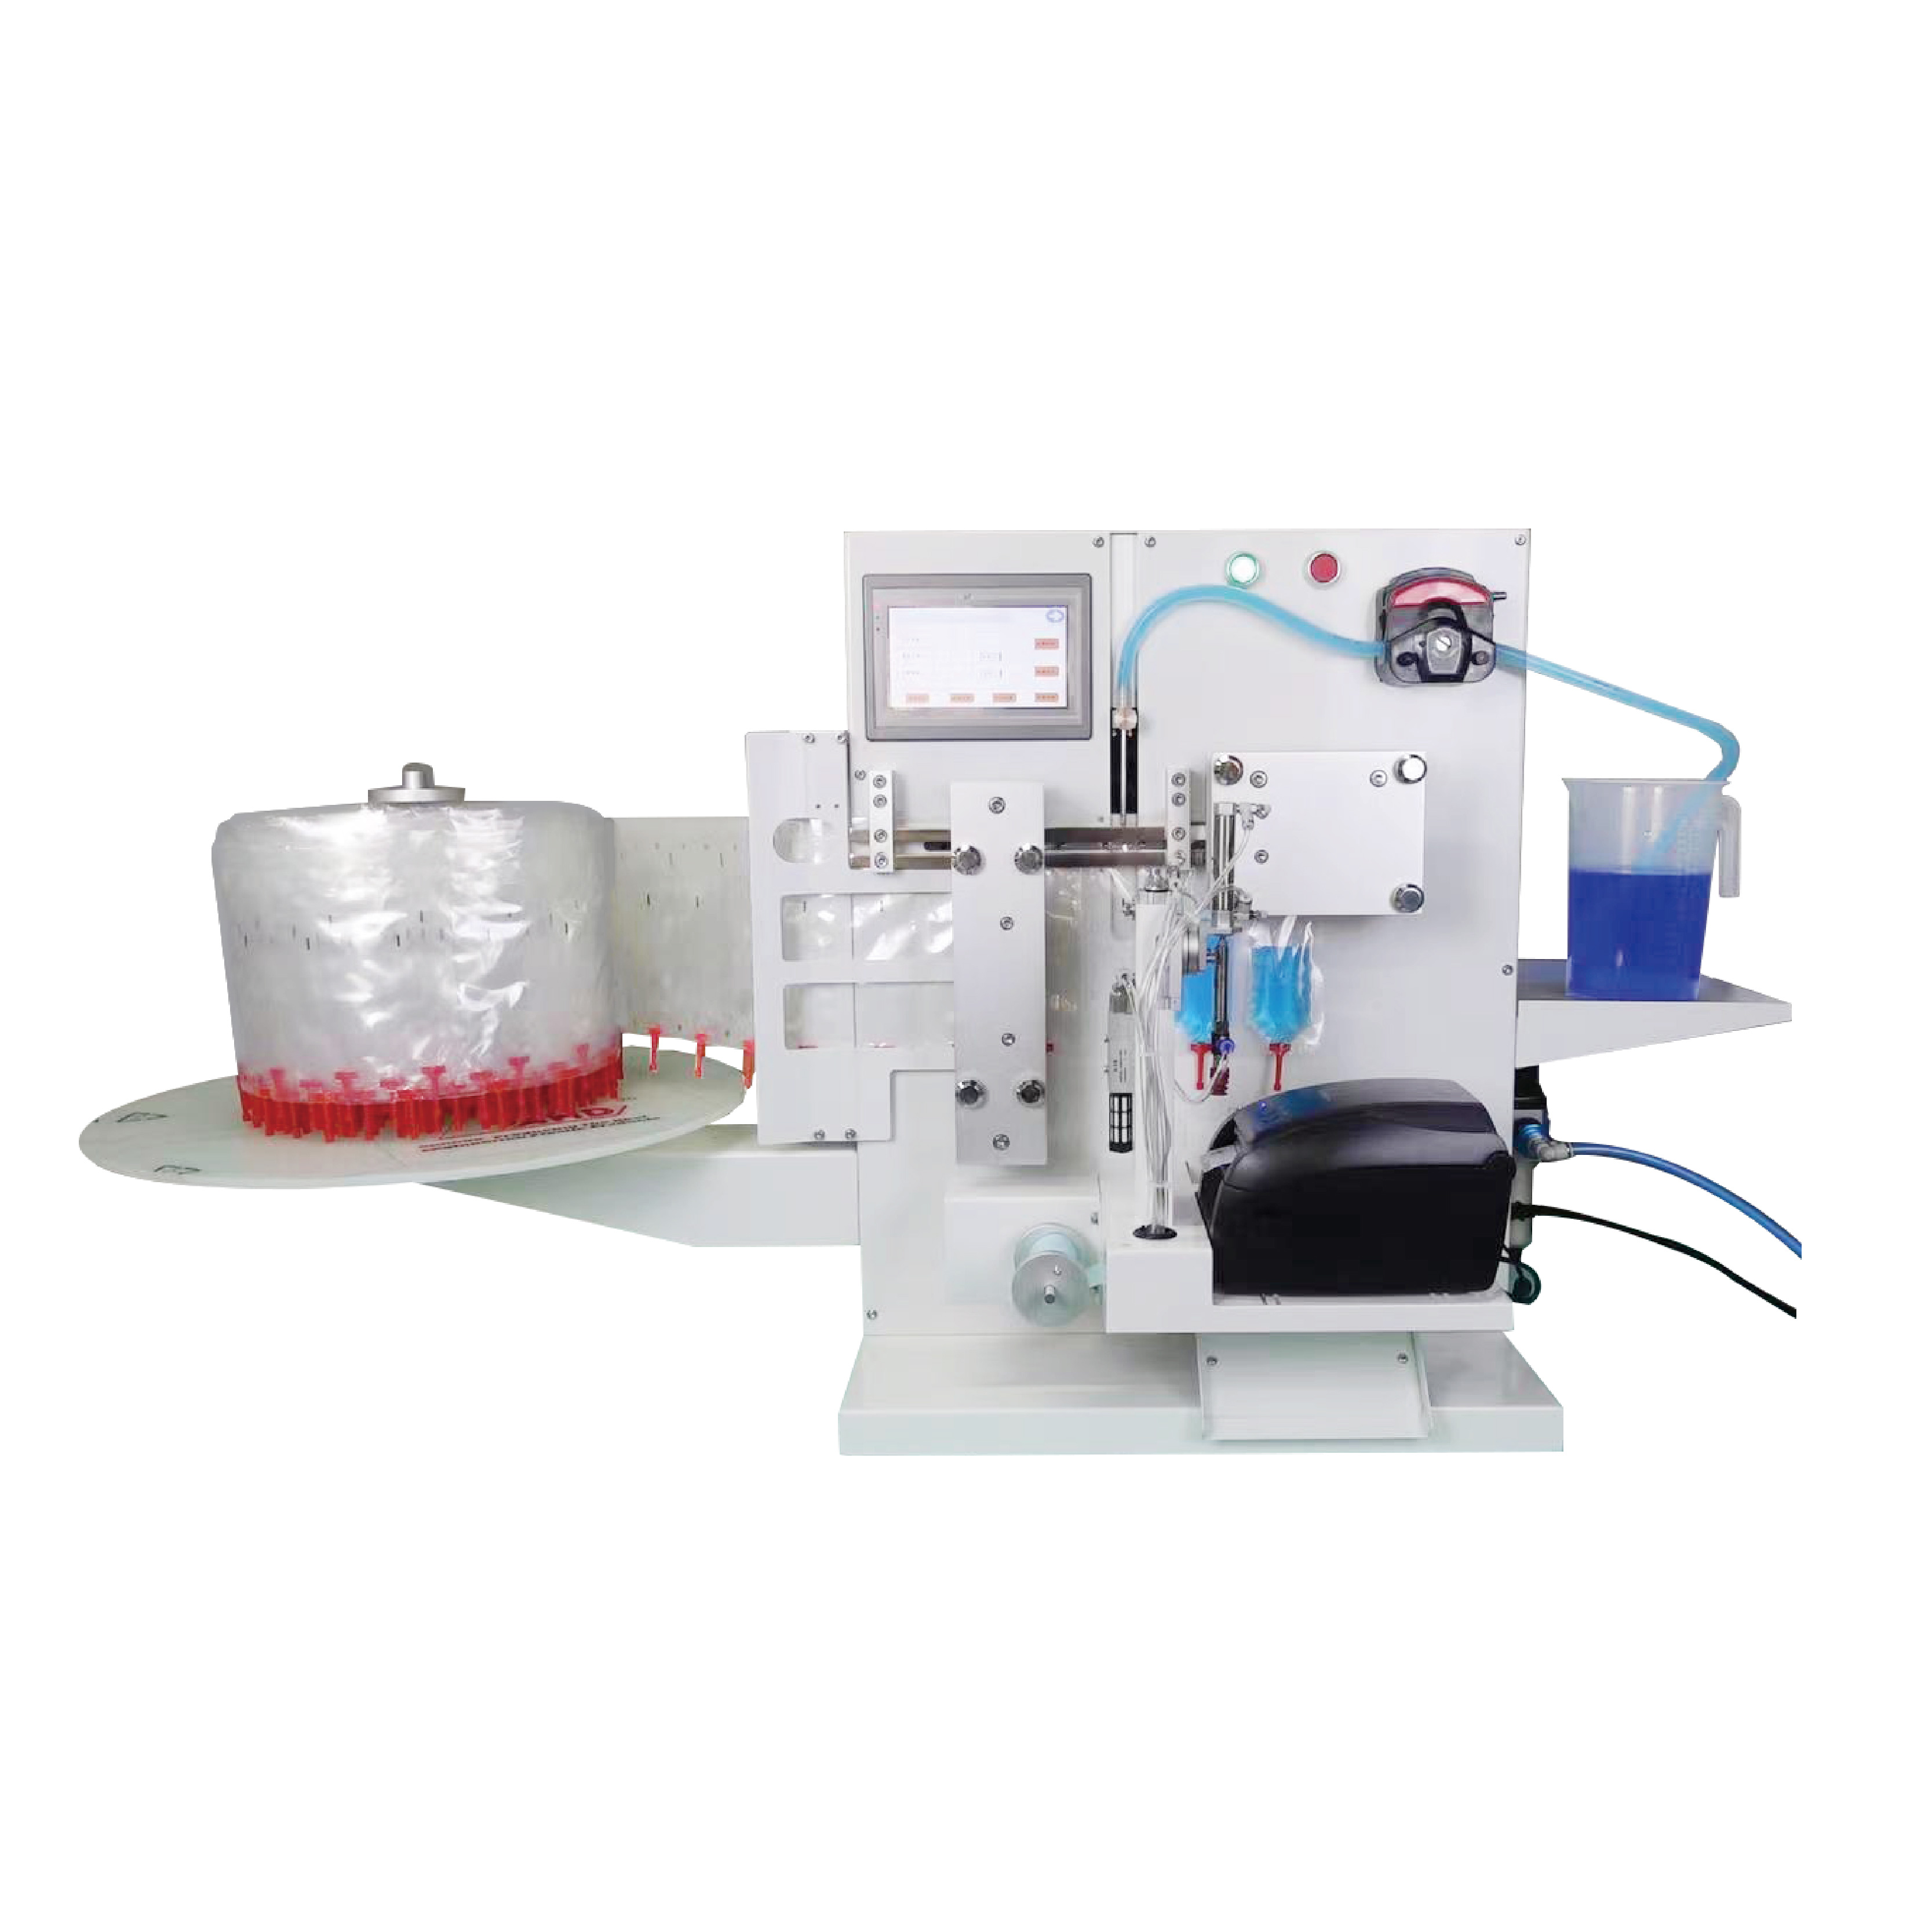 Super-100 full-automatic semen filling and sealing machine with labeling